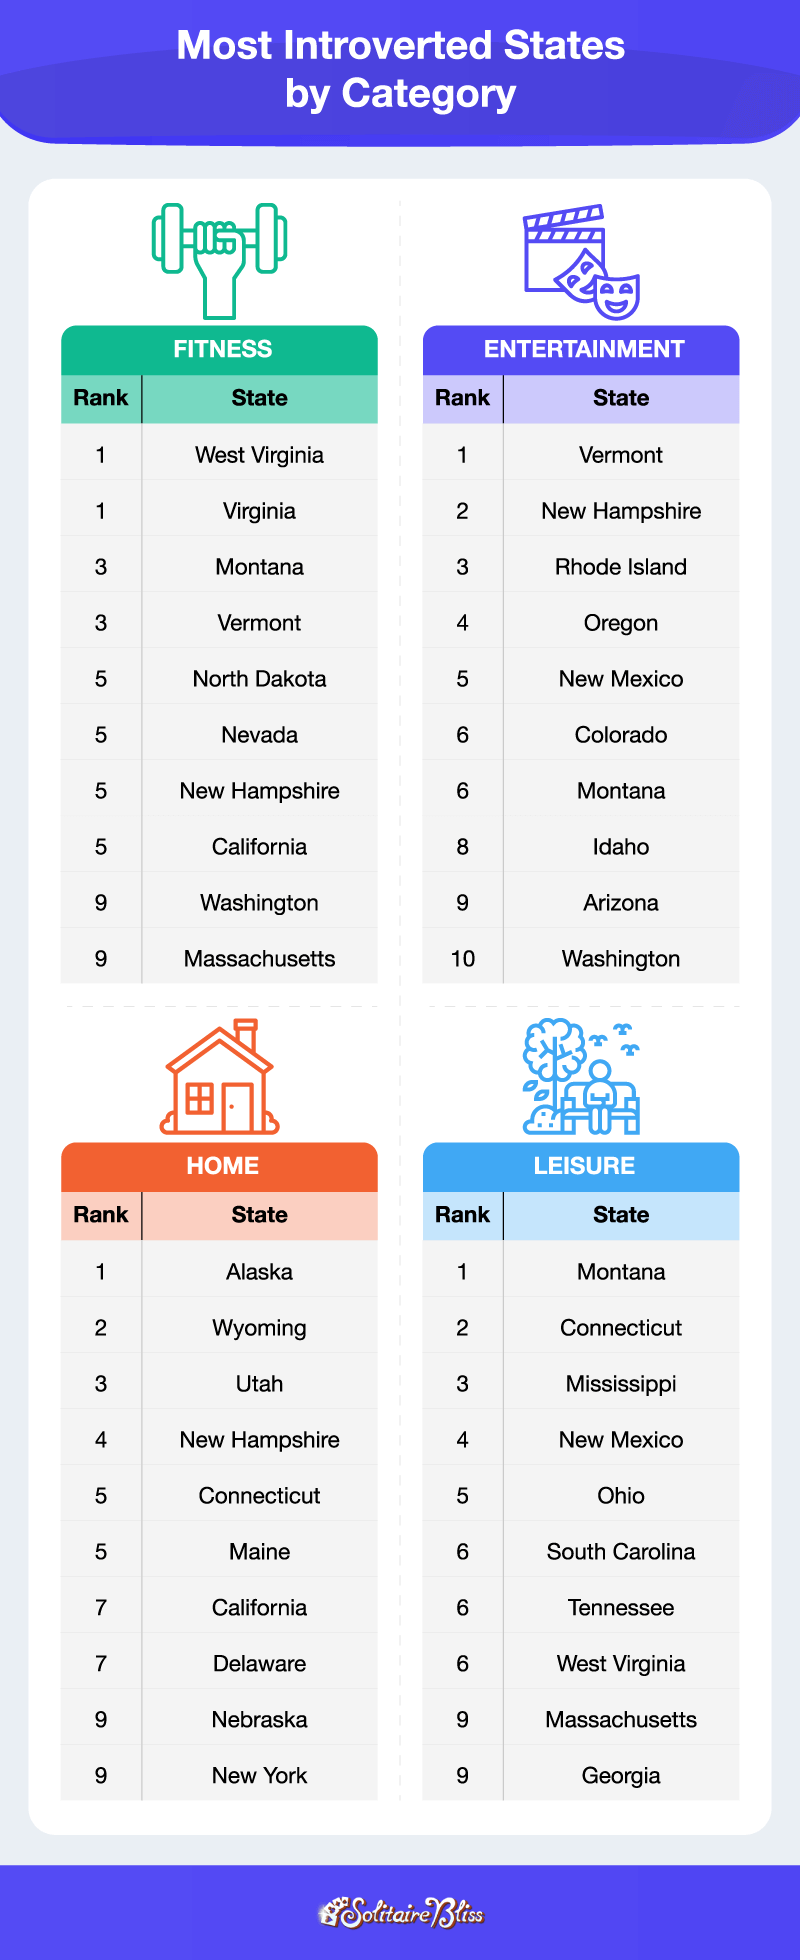 most introverted states by category including fitness, entertainment, home, and leisure